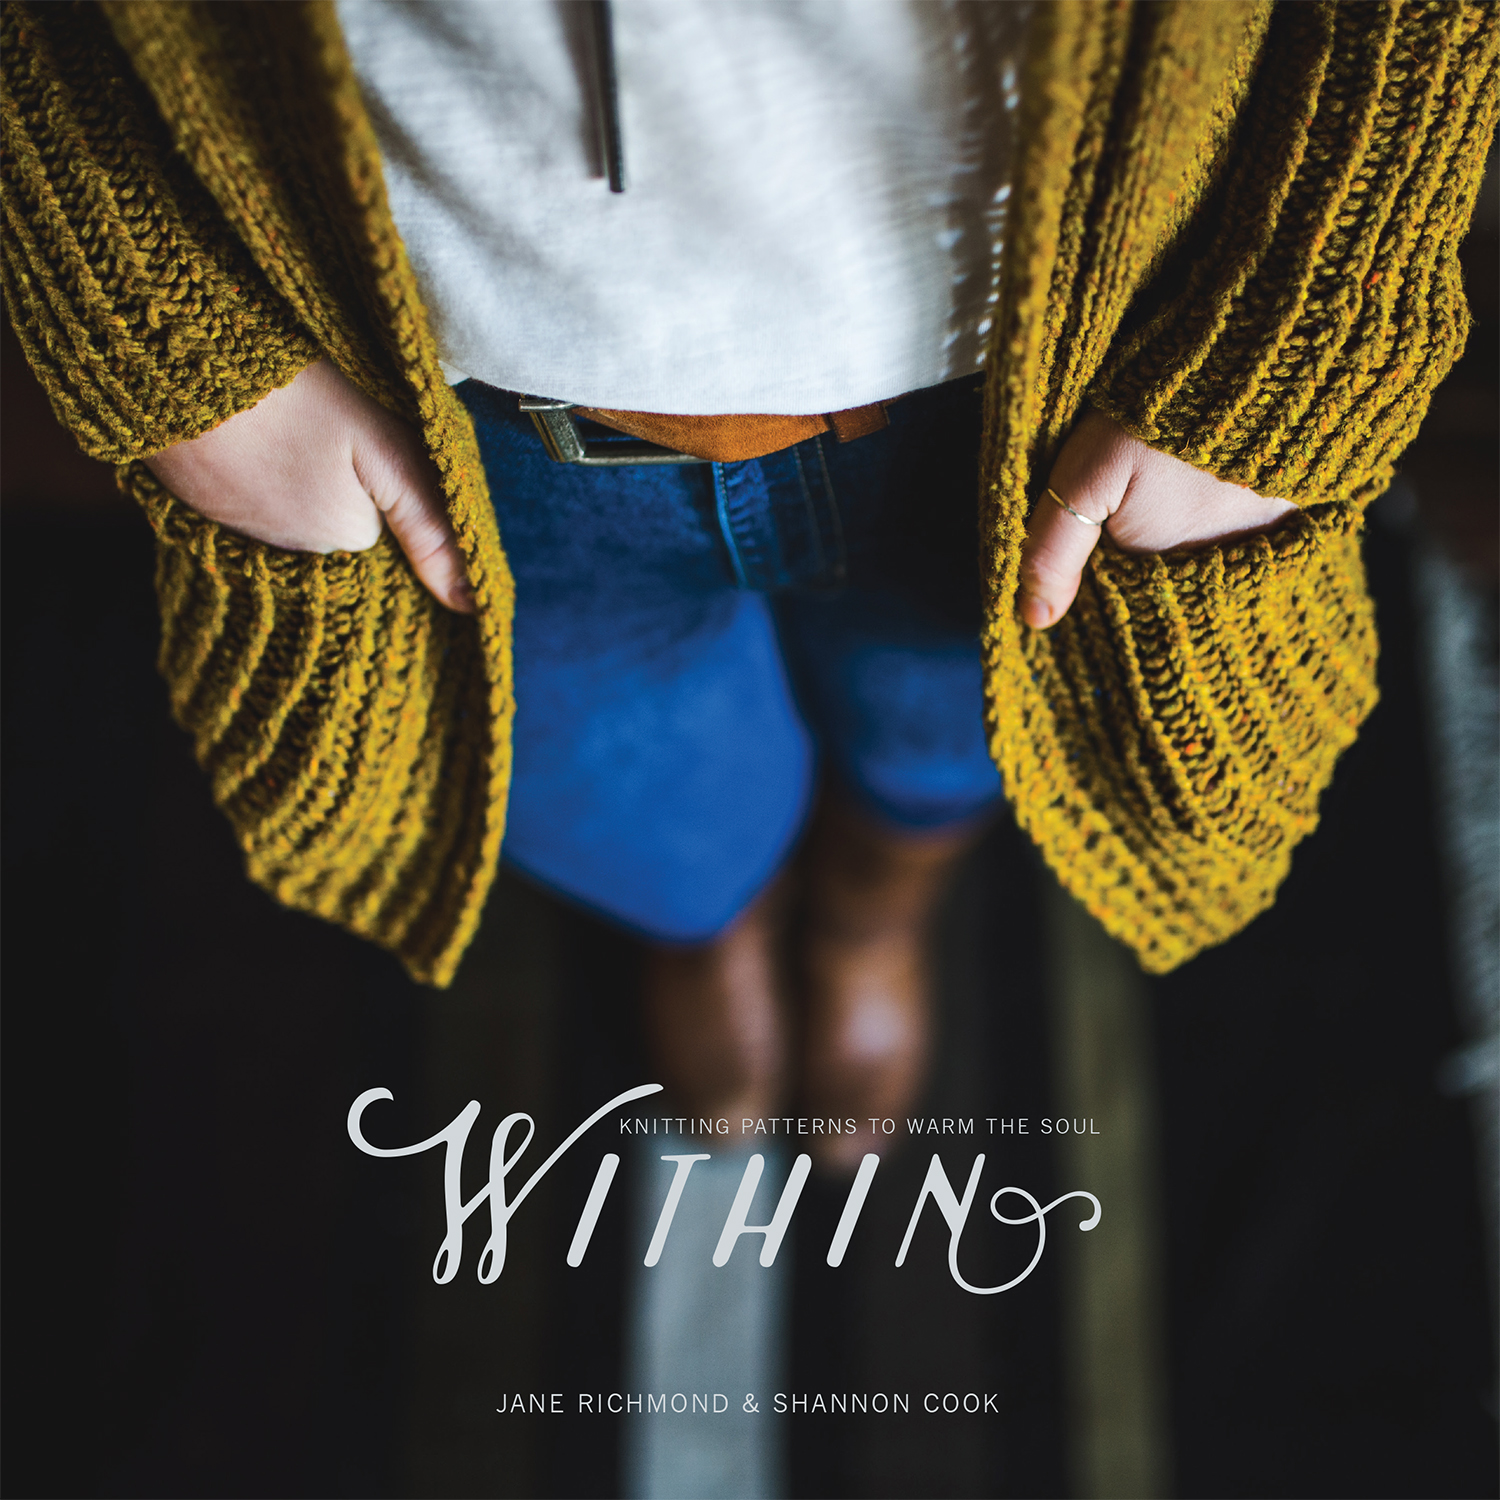 https://images.squarespace-cdn.com/content/v1/511a9ec6e4b0dcc6d89a61d0/1475716987568-7AS6T2ROBYF21WXLKAHP/Within%3A+Knitting+Patterns+to+Warm+the+Soul+by+Shannon+Cook+%26+Jane+Richmond+%23withinknits